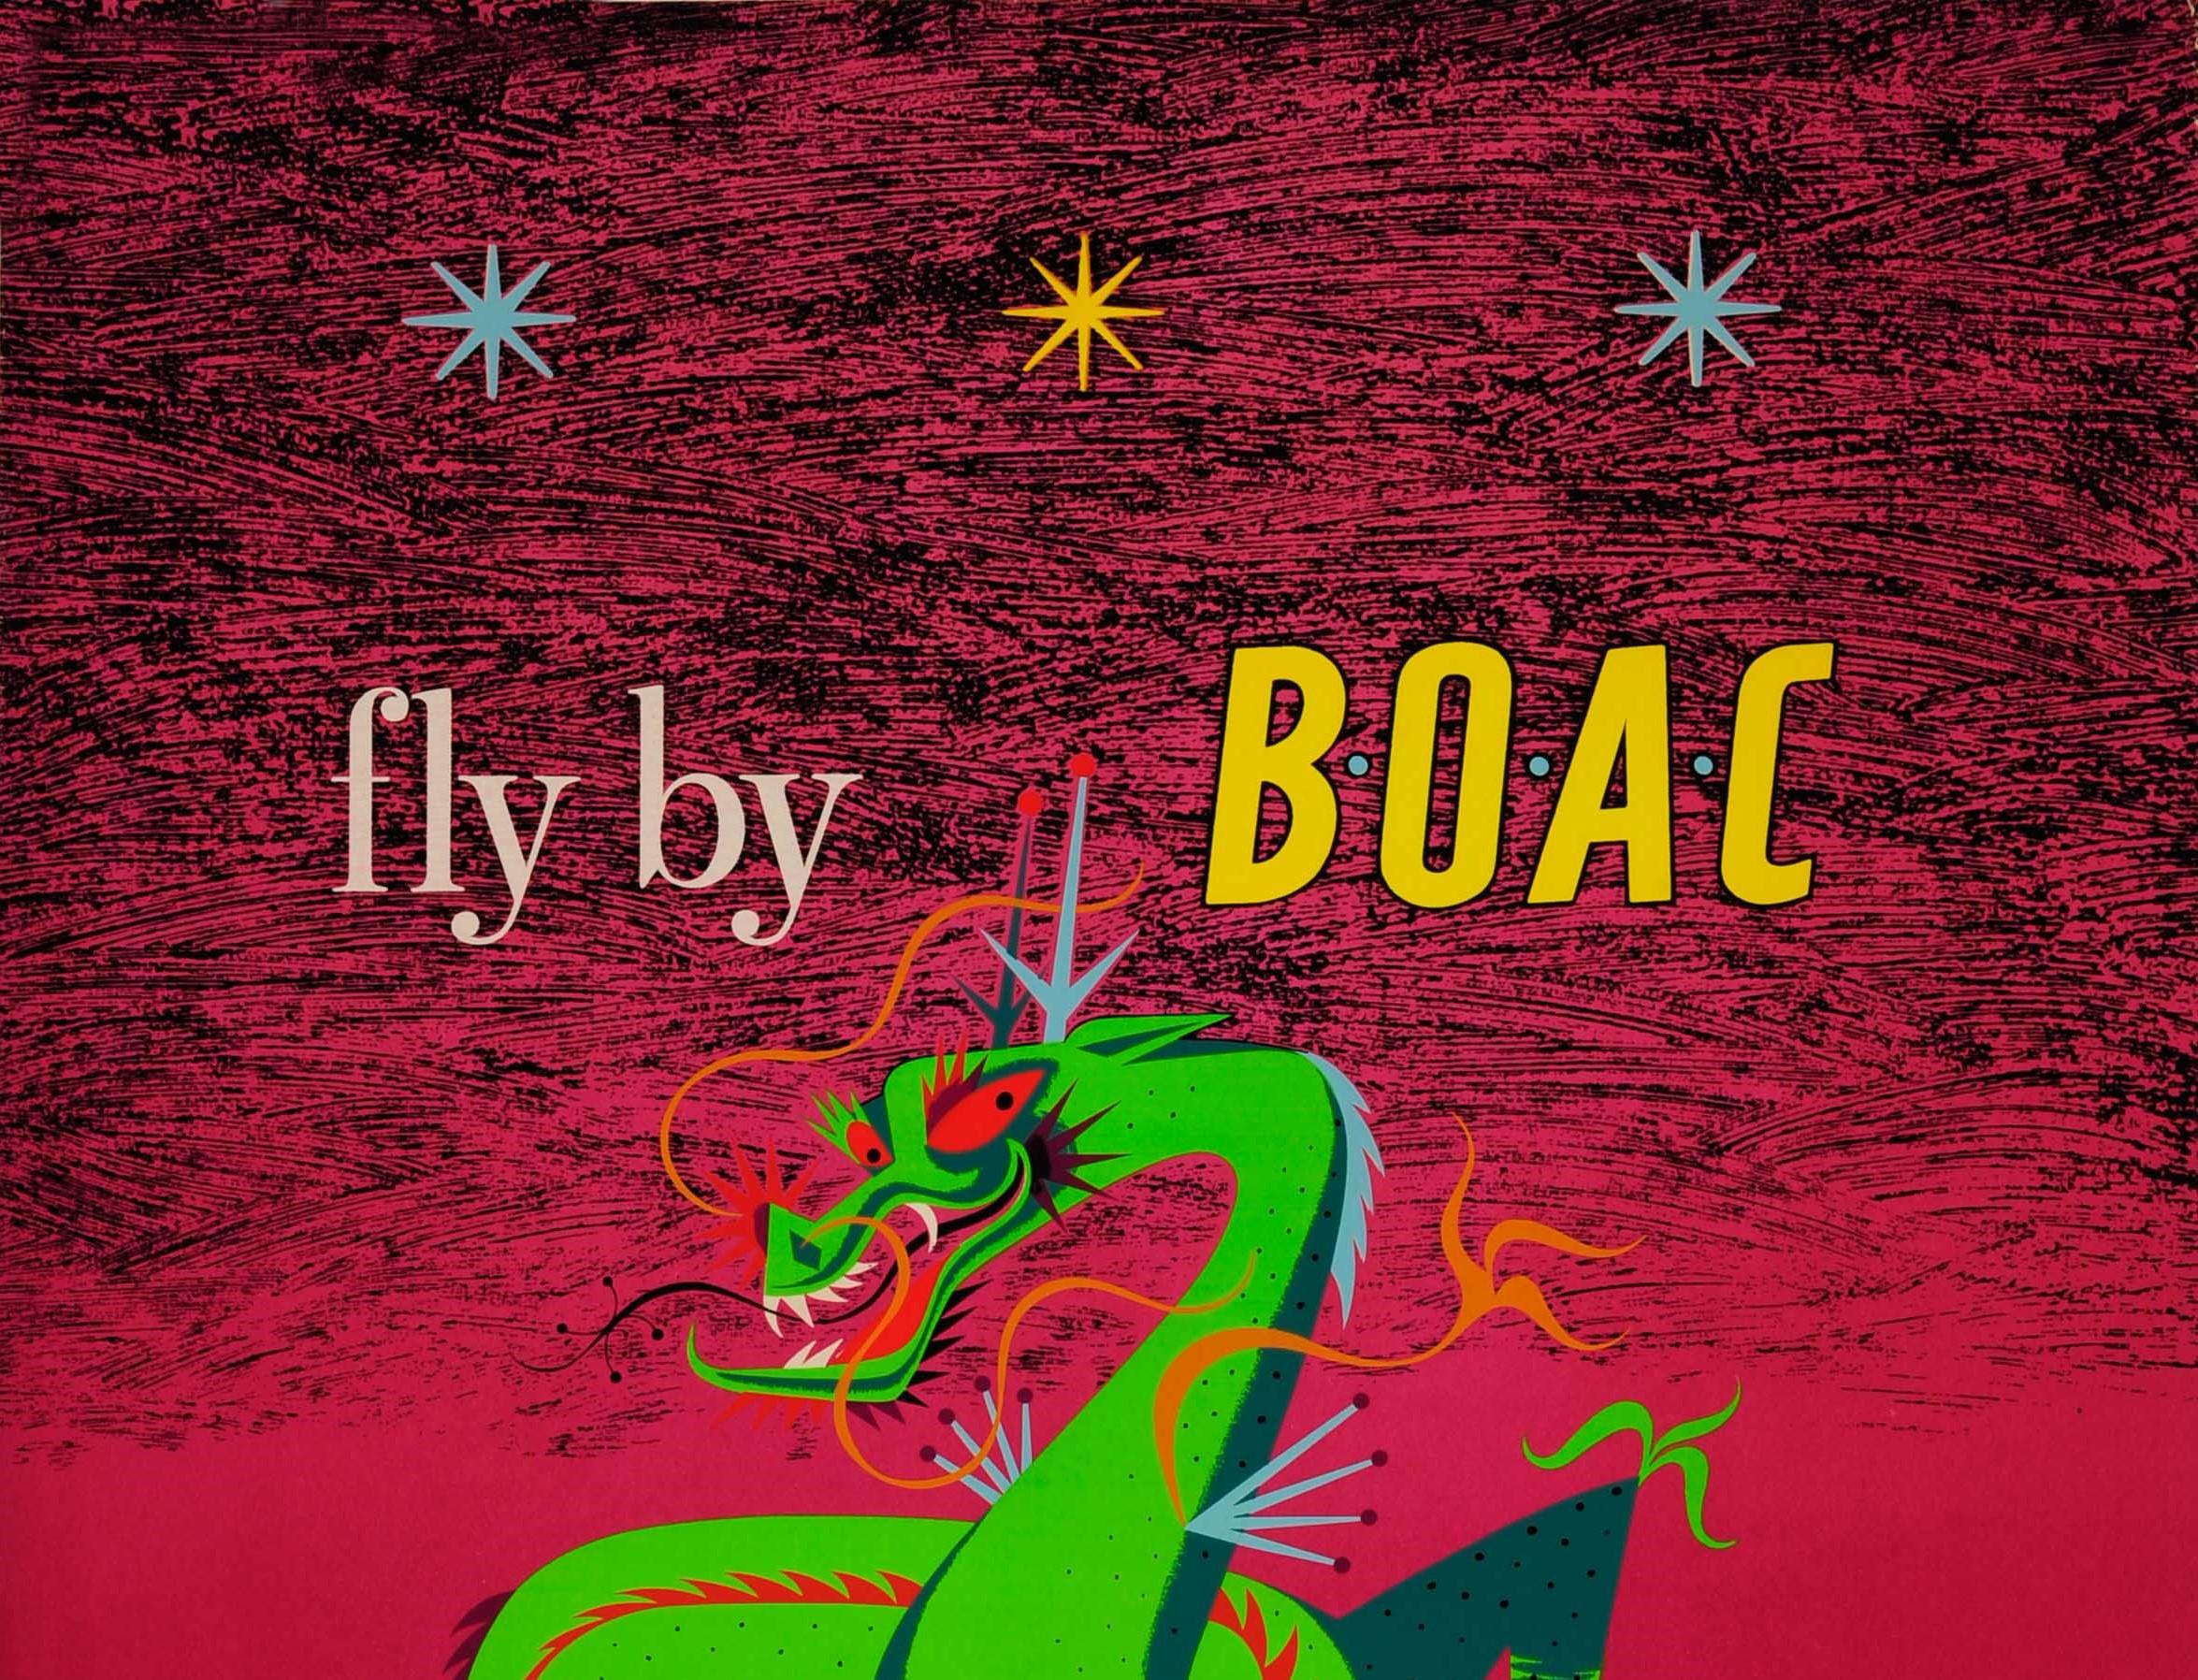 Original vintage travel poster, Fly by BOAC to the Far East, featuring a colourful illustration Maurice Laban (1912–1970) showing a green dragon against a purple and black shaded background with the text and blue and yellow stars above and below,